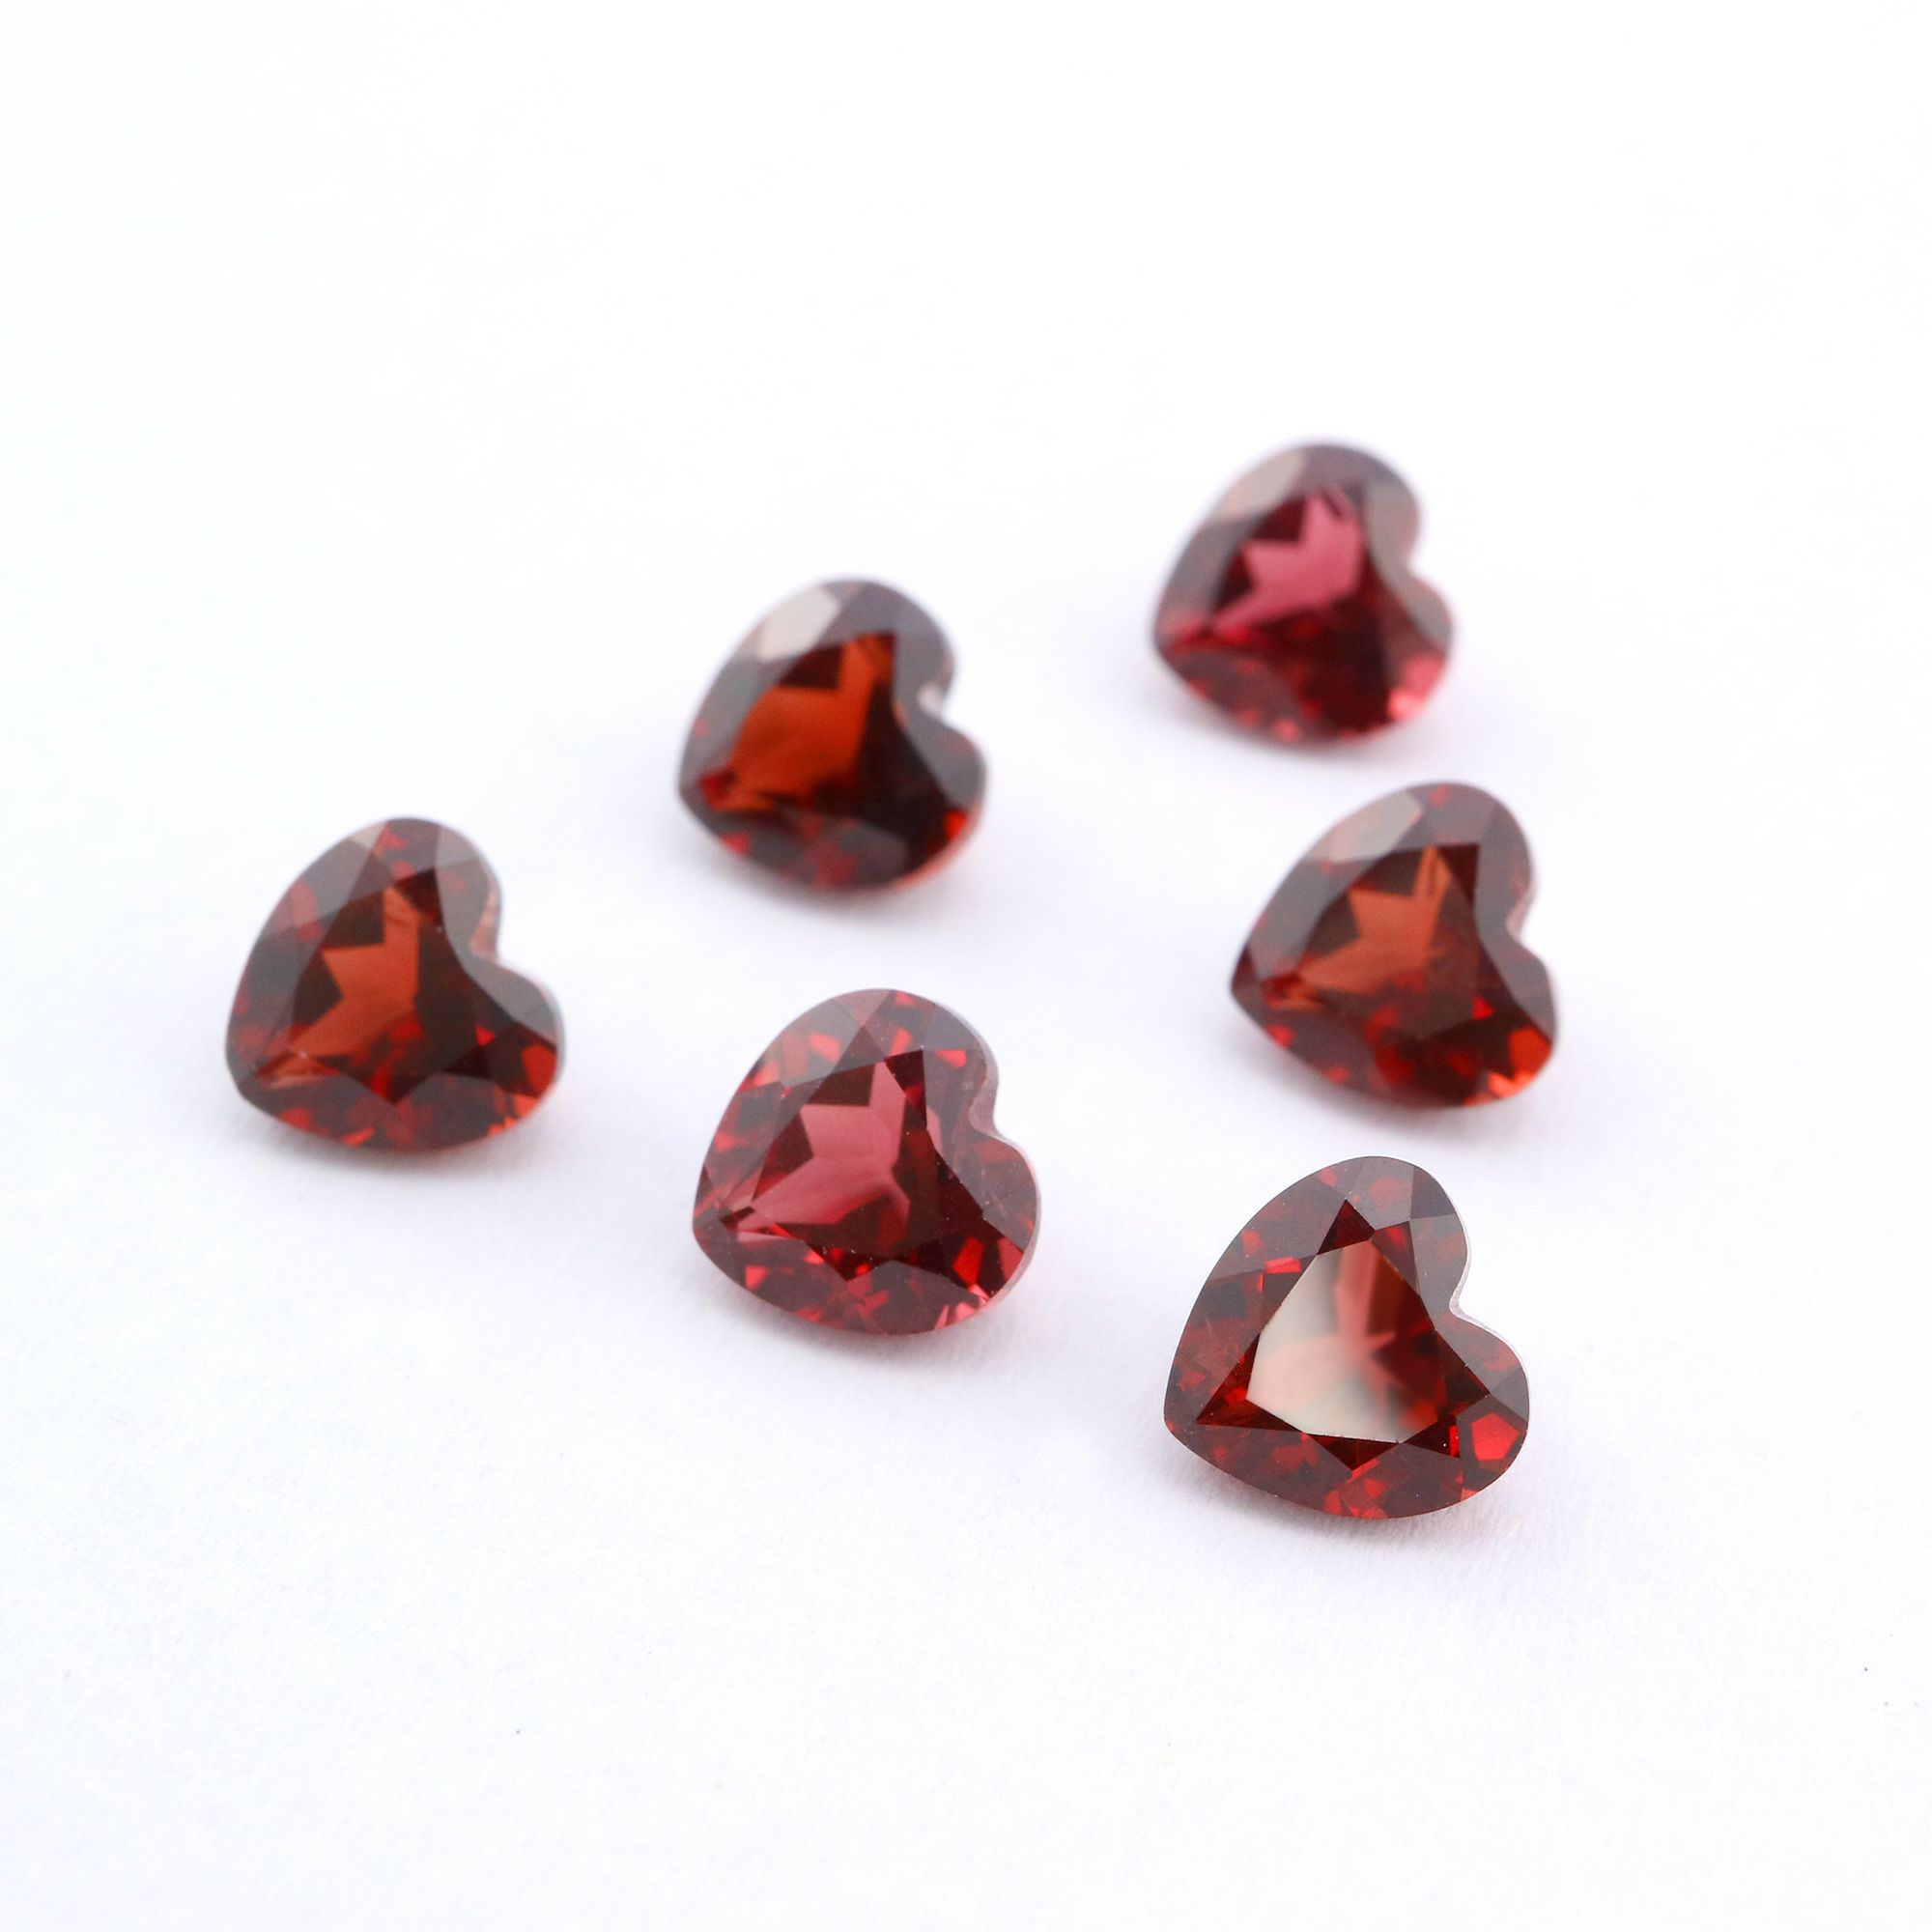 5Pcs Heart Red Garnet January Birthstone Faceted Cut Loose Gemstone Nature Semi Precious Stone DIY Jewelry Supplies 4130014 - Click Image to Close